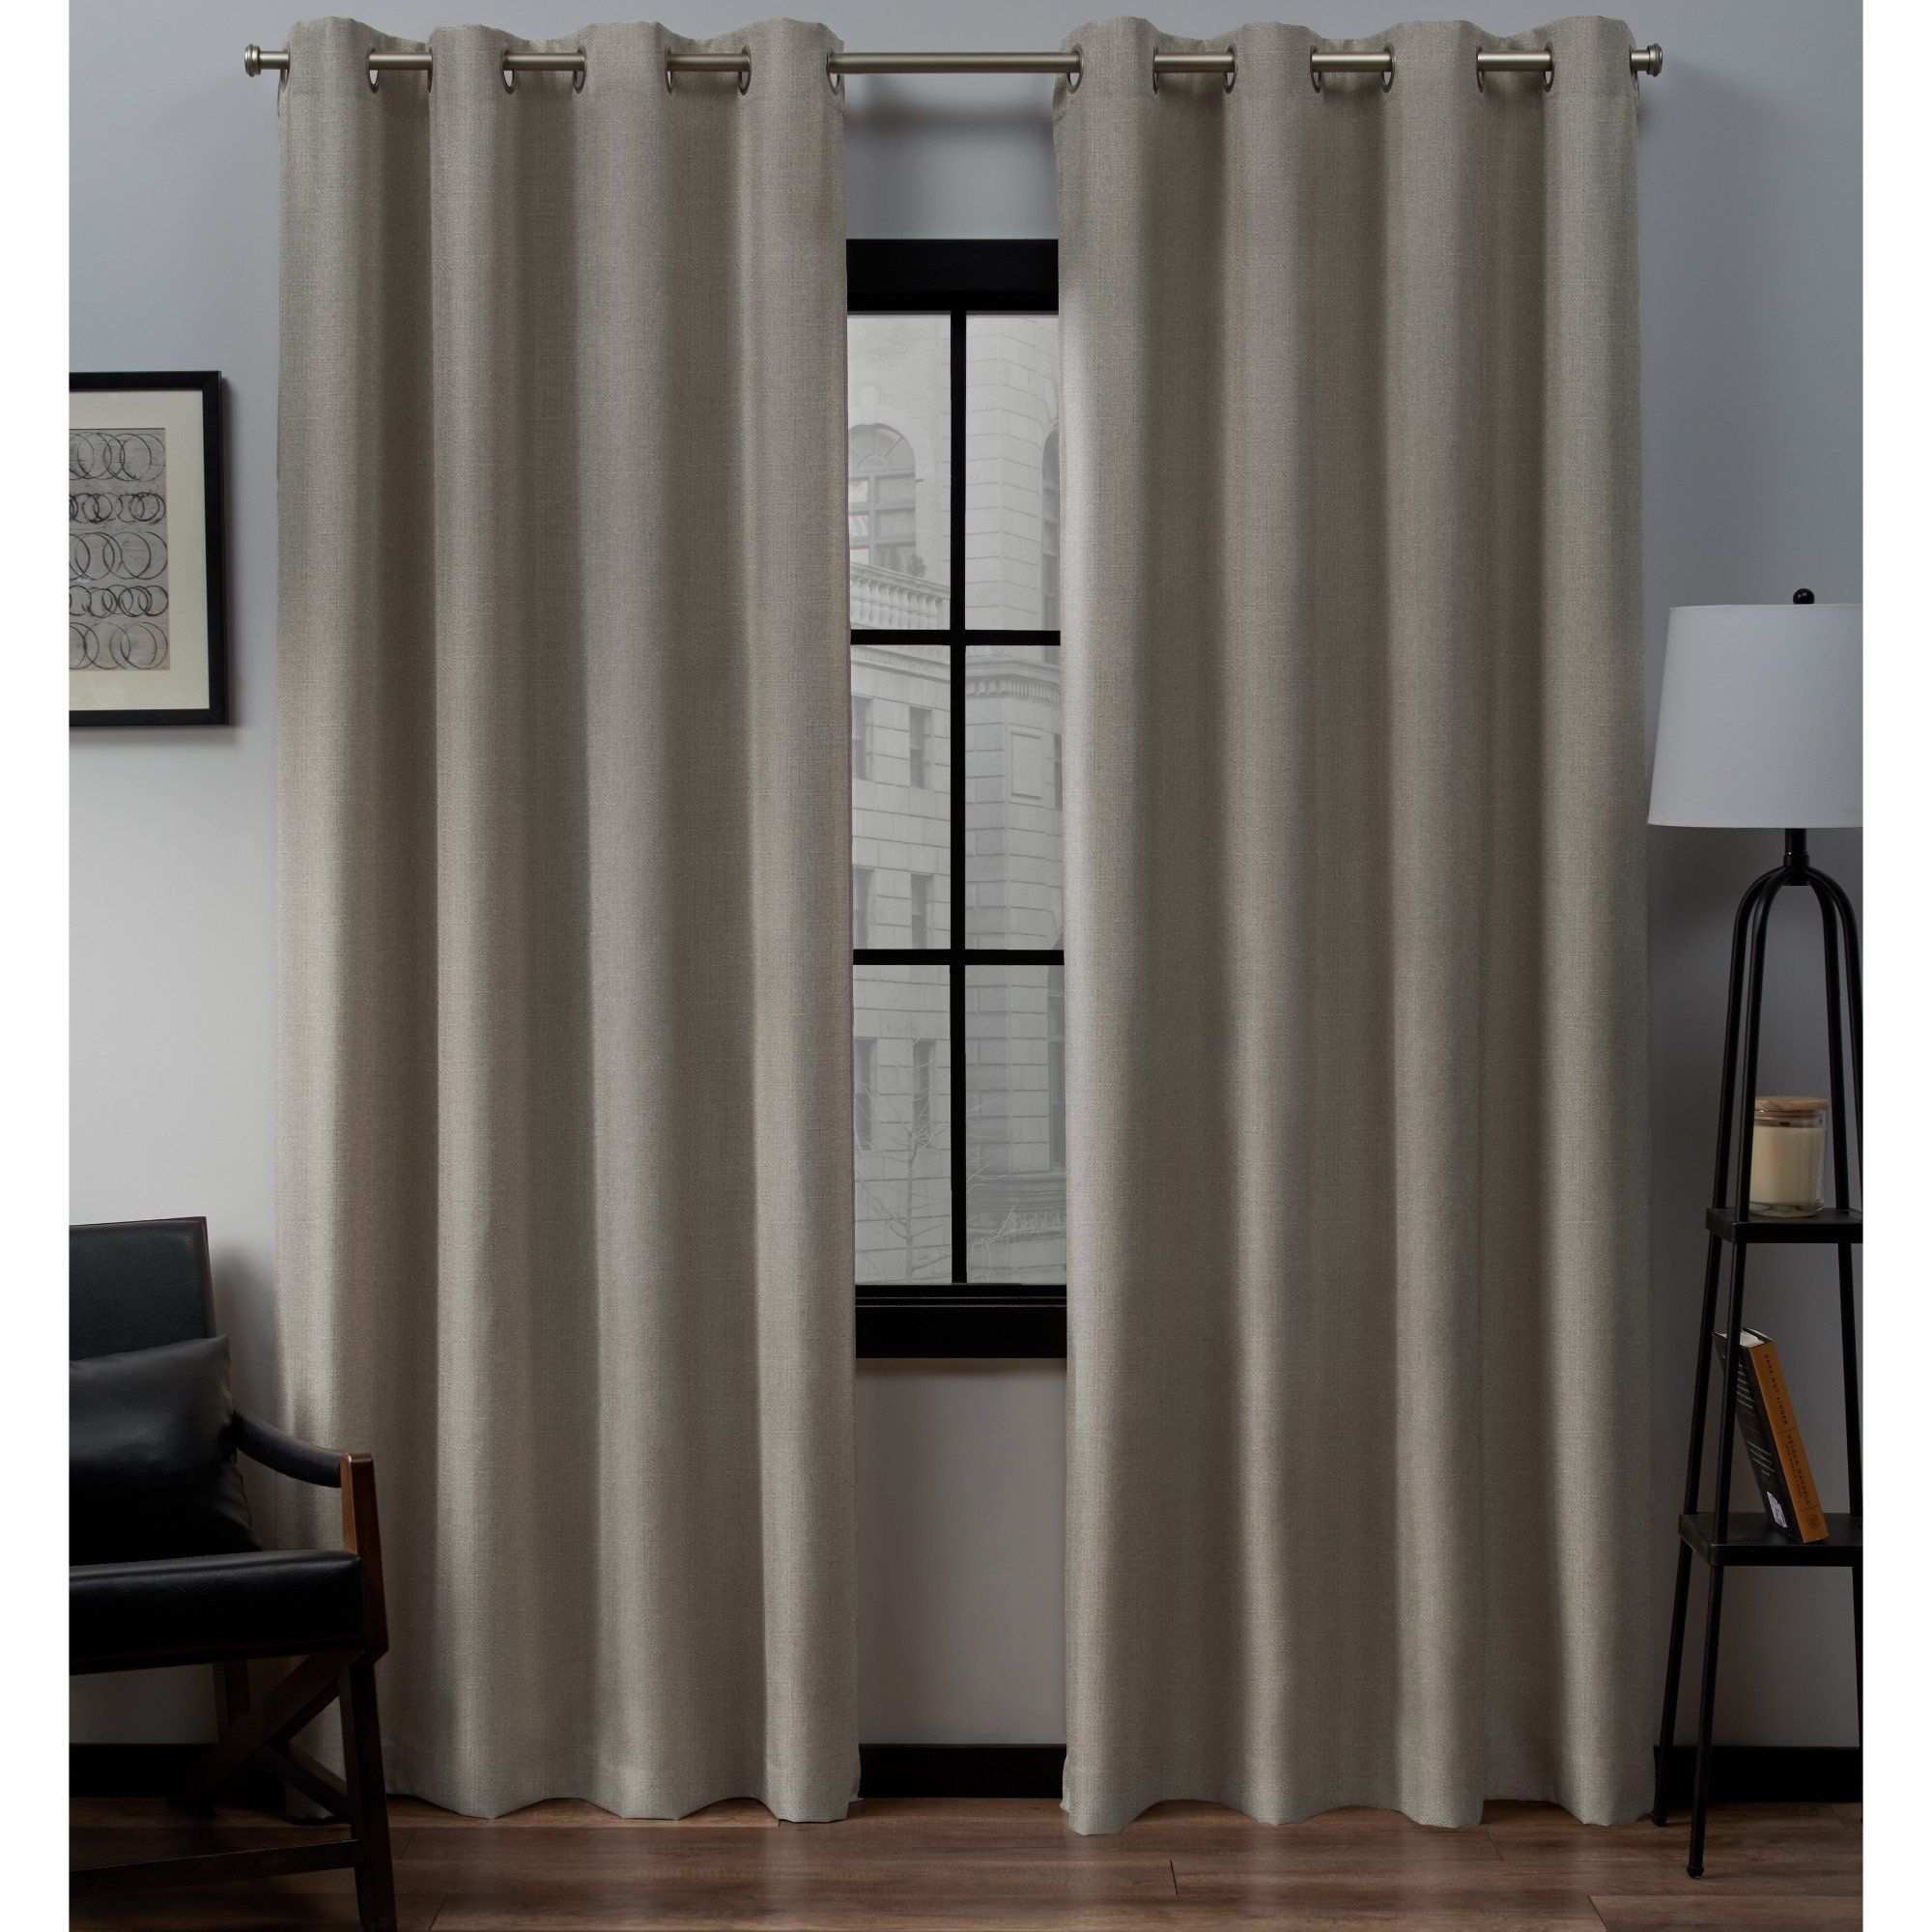 Ideas: Sensational Grommet Curtain Panels With Inspiring Inside Thermal Insulated Blackout Grommet Top Curtain Panel Pairs (View 25 of 30)